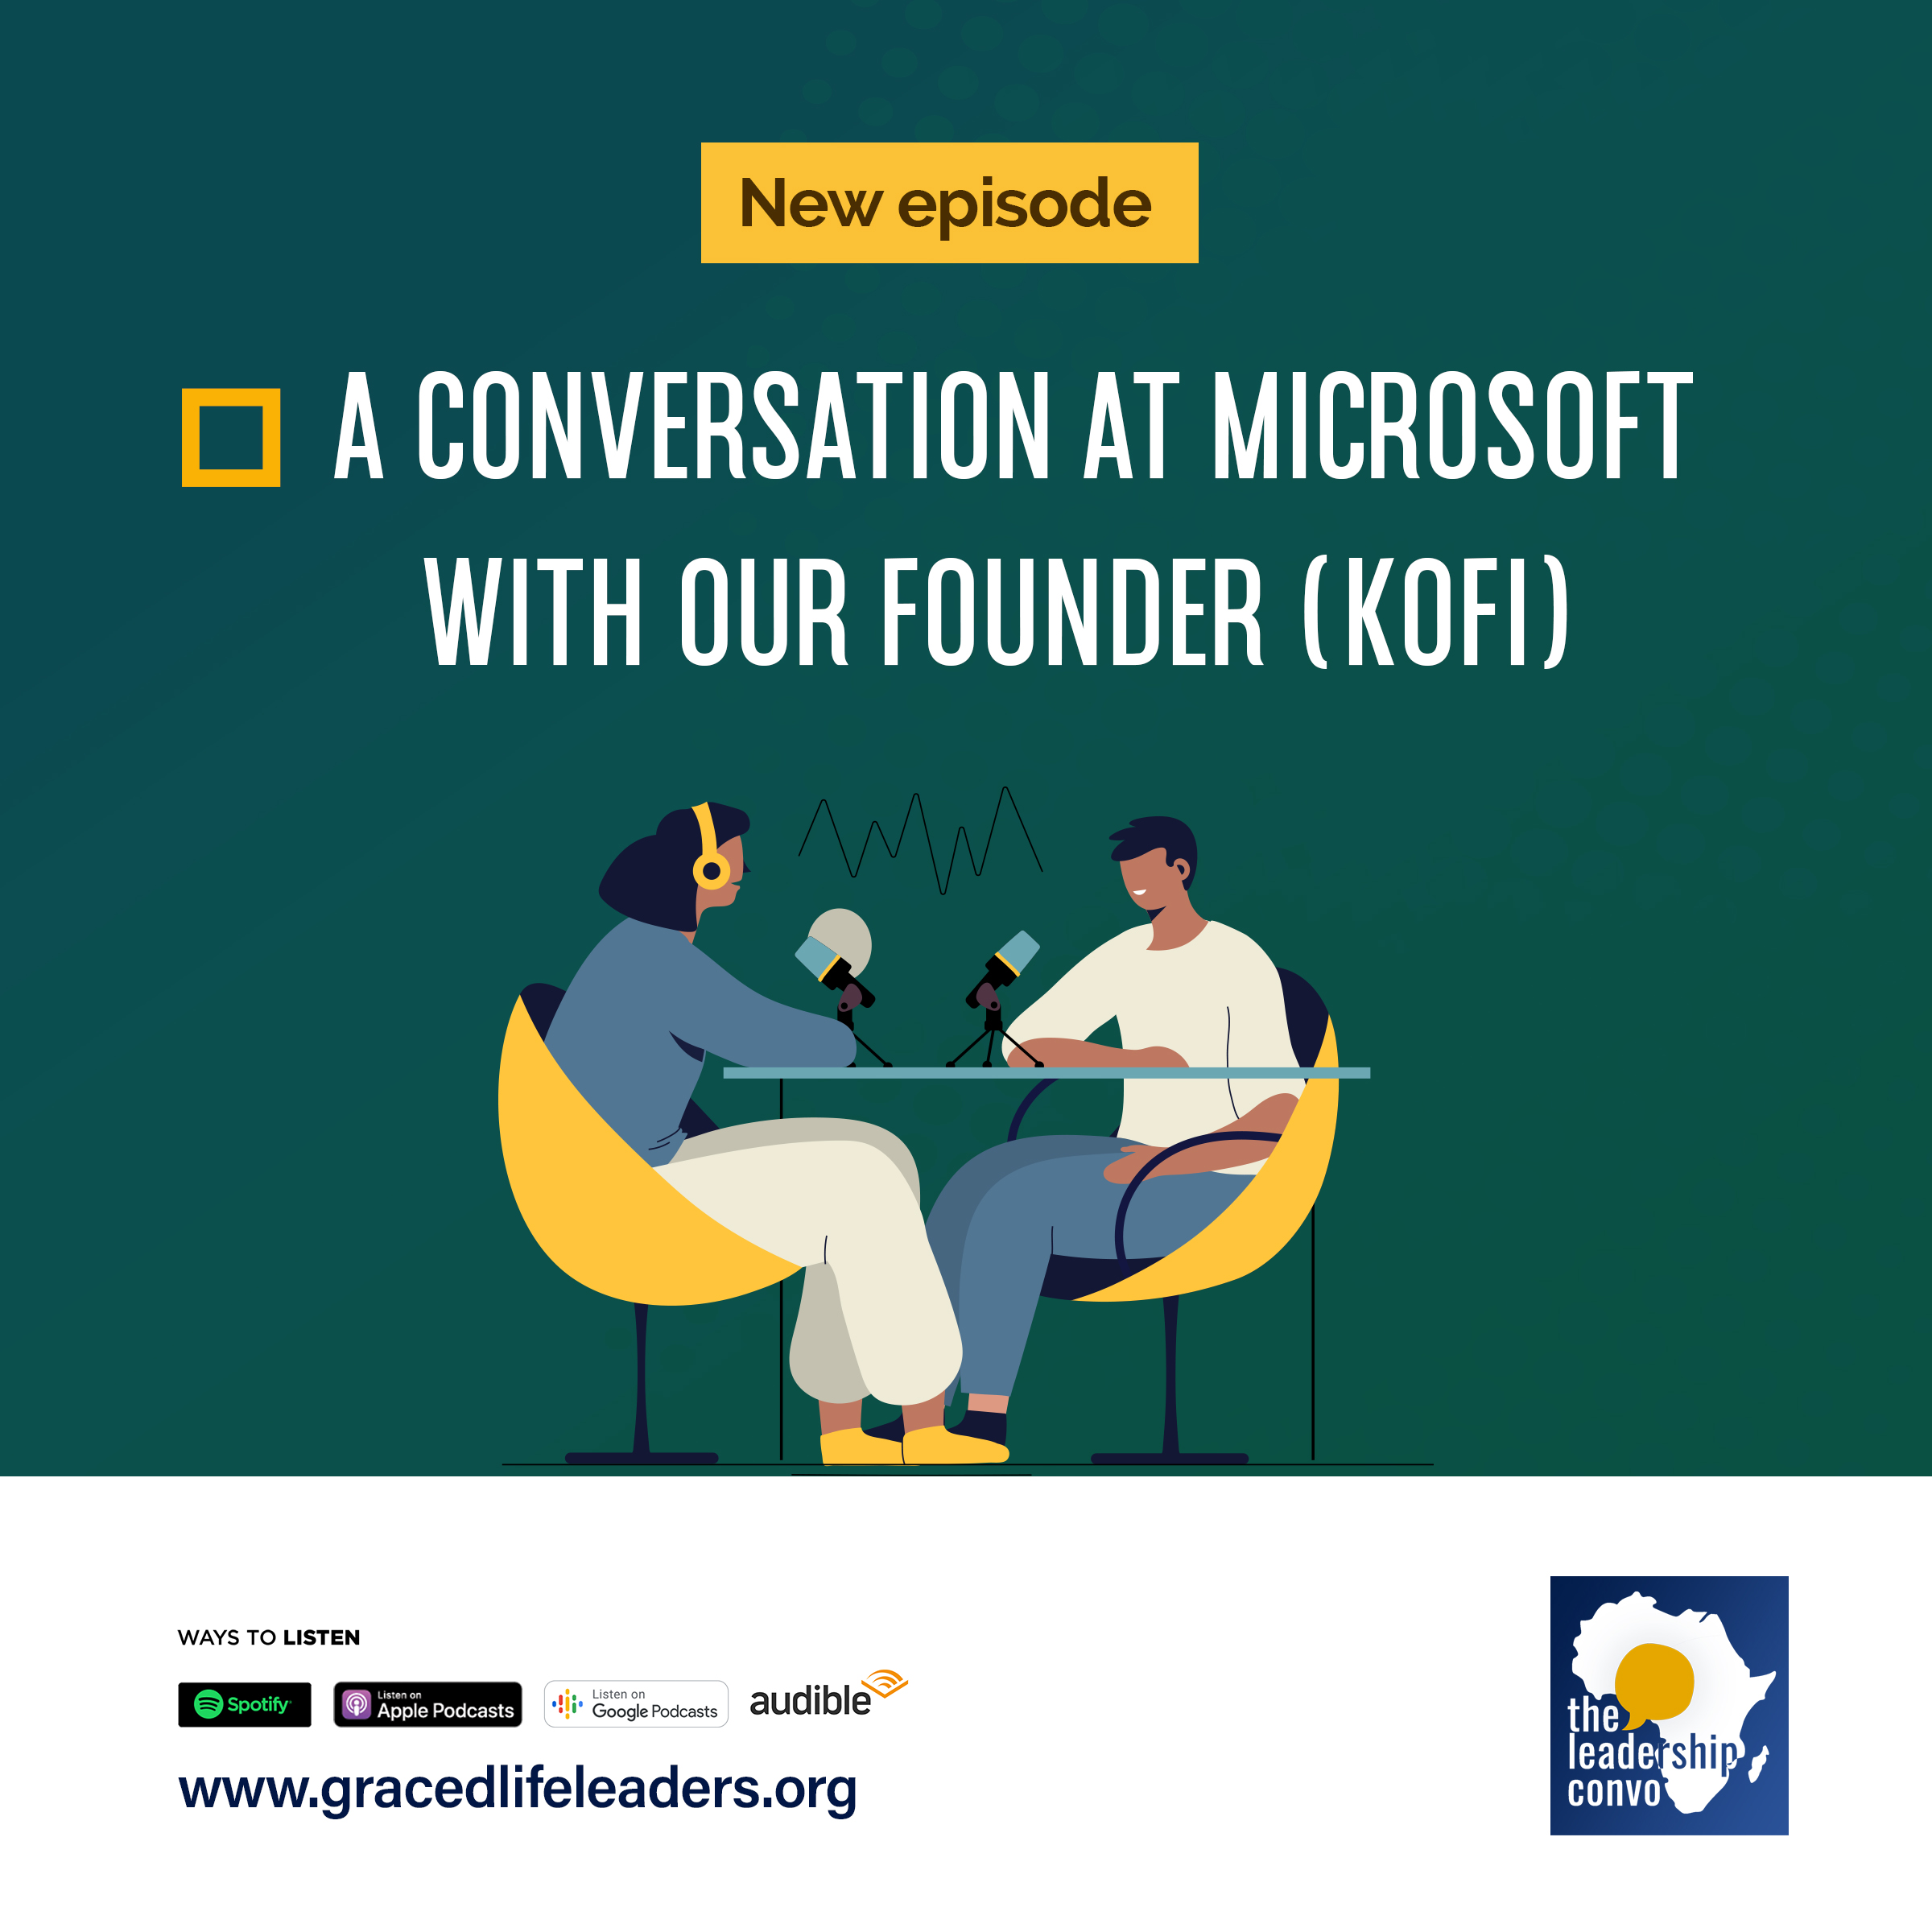  A CONVERSATION AT MICROSOFT WITH OUR FOUNDER (KOFI) 